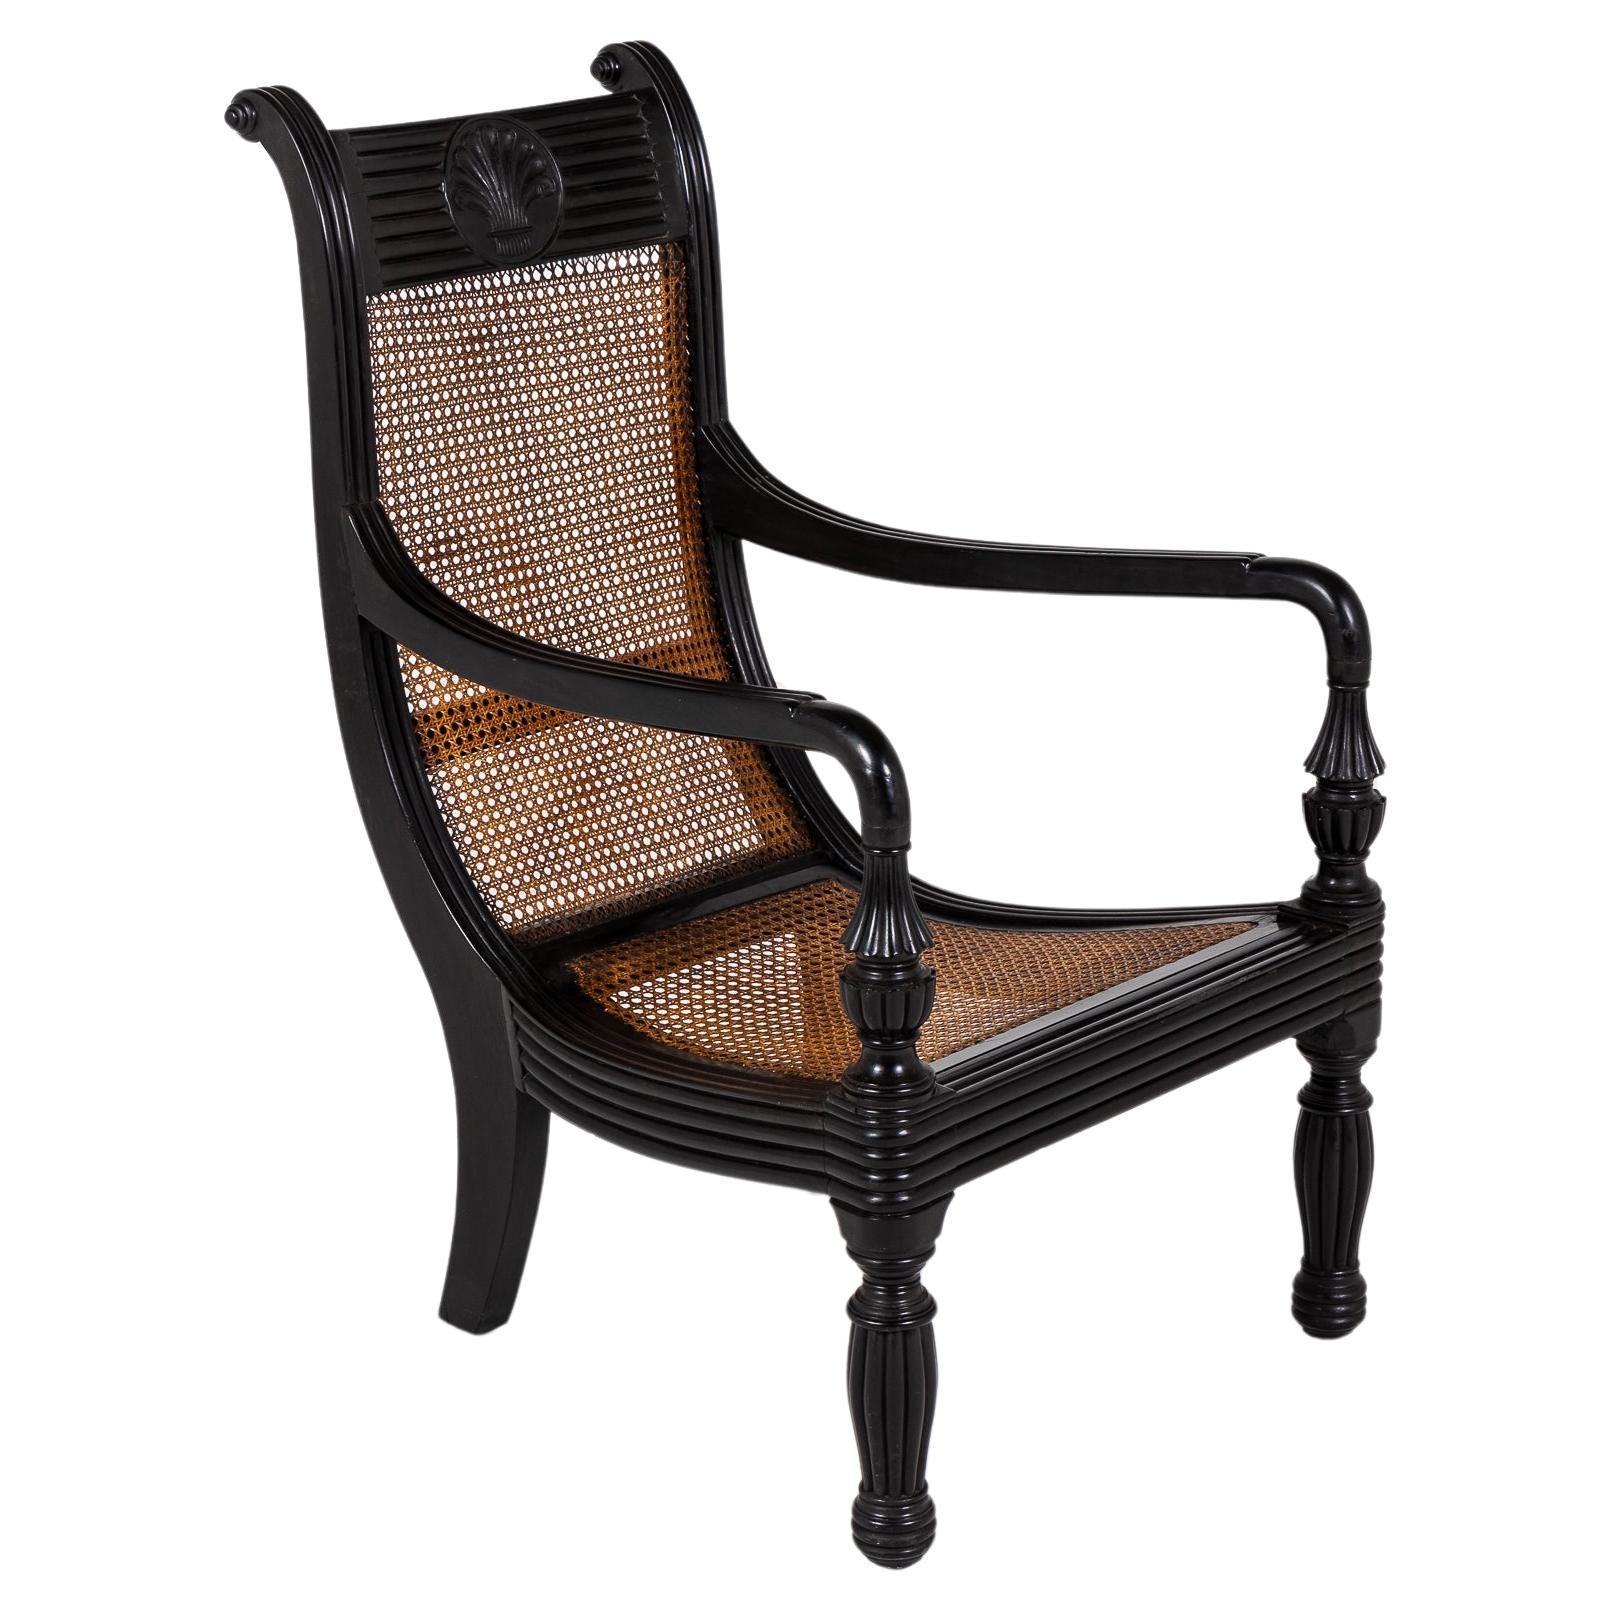 Large 19th Century Anglo-Indian Ebony Library Armchair